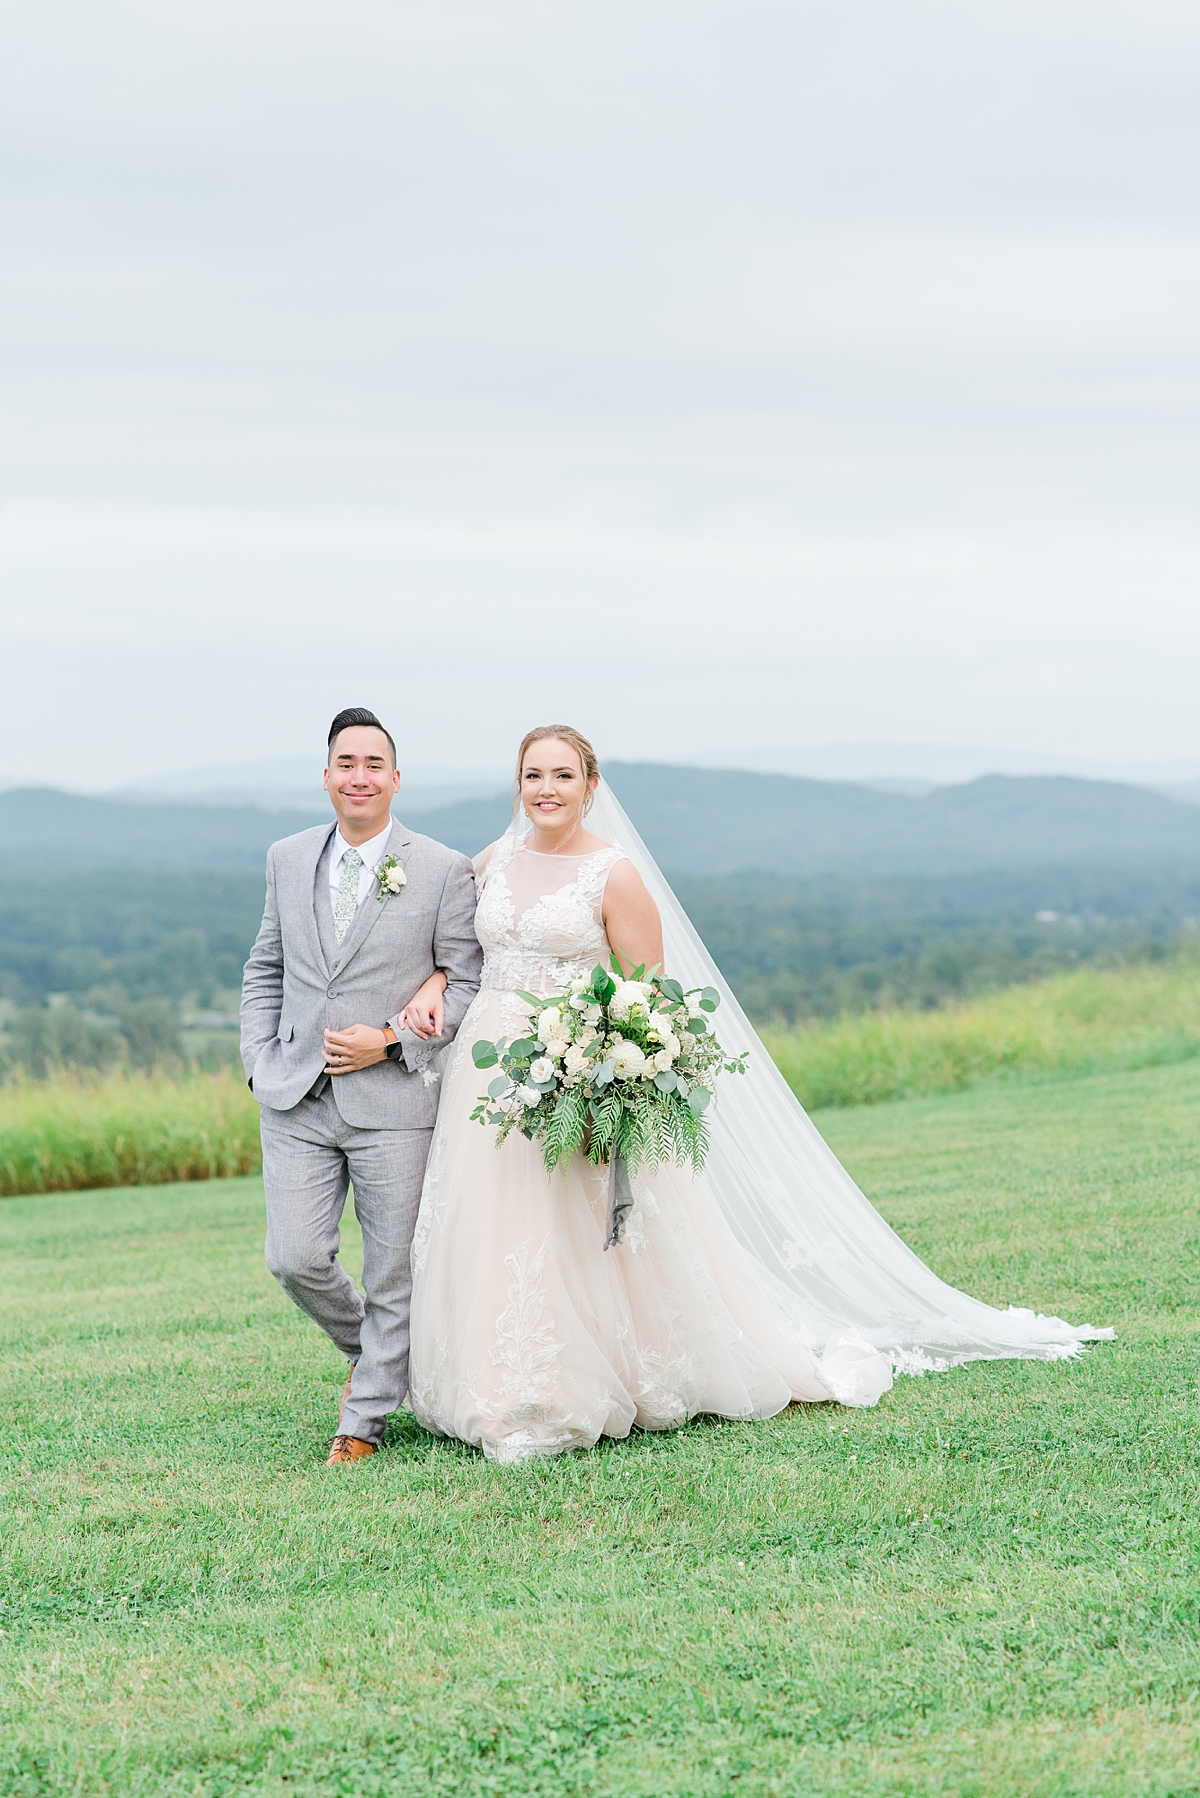 Bride and Groom Portraits with Mountain View at a Timeless Grace Estate Winery Wedding. Wedding Photography by Charlottesville Wedding Photographer Kailey Brianne Photography.